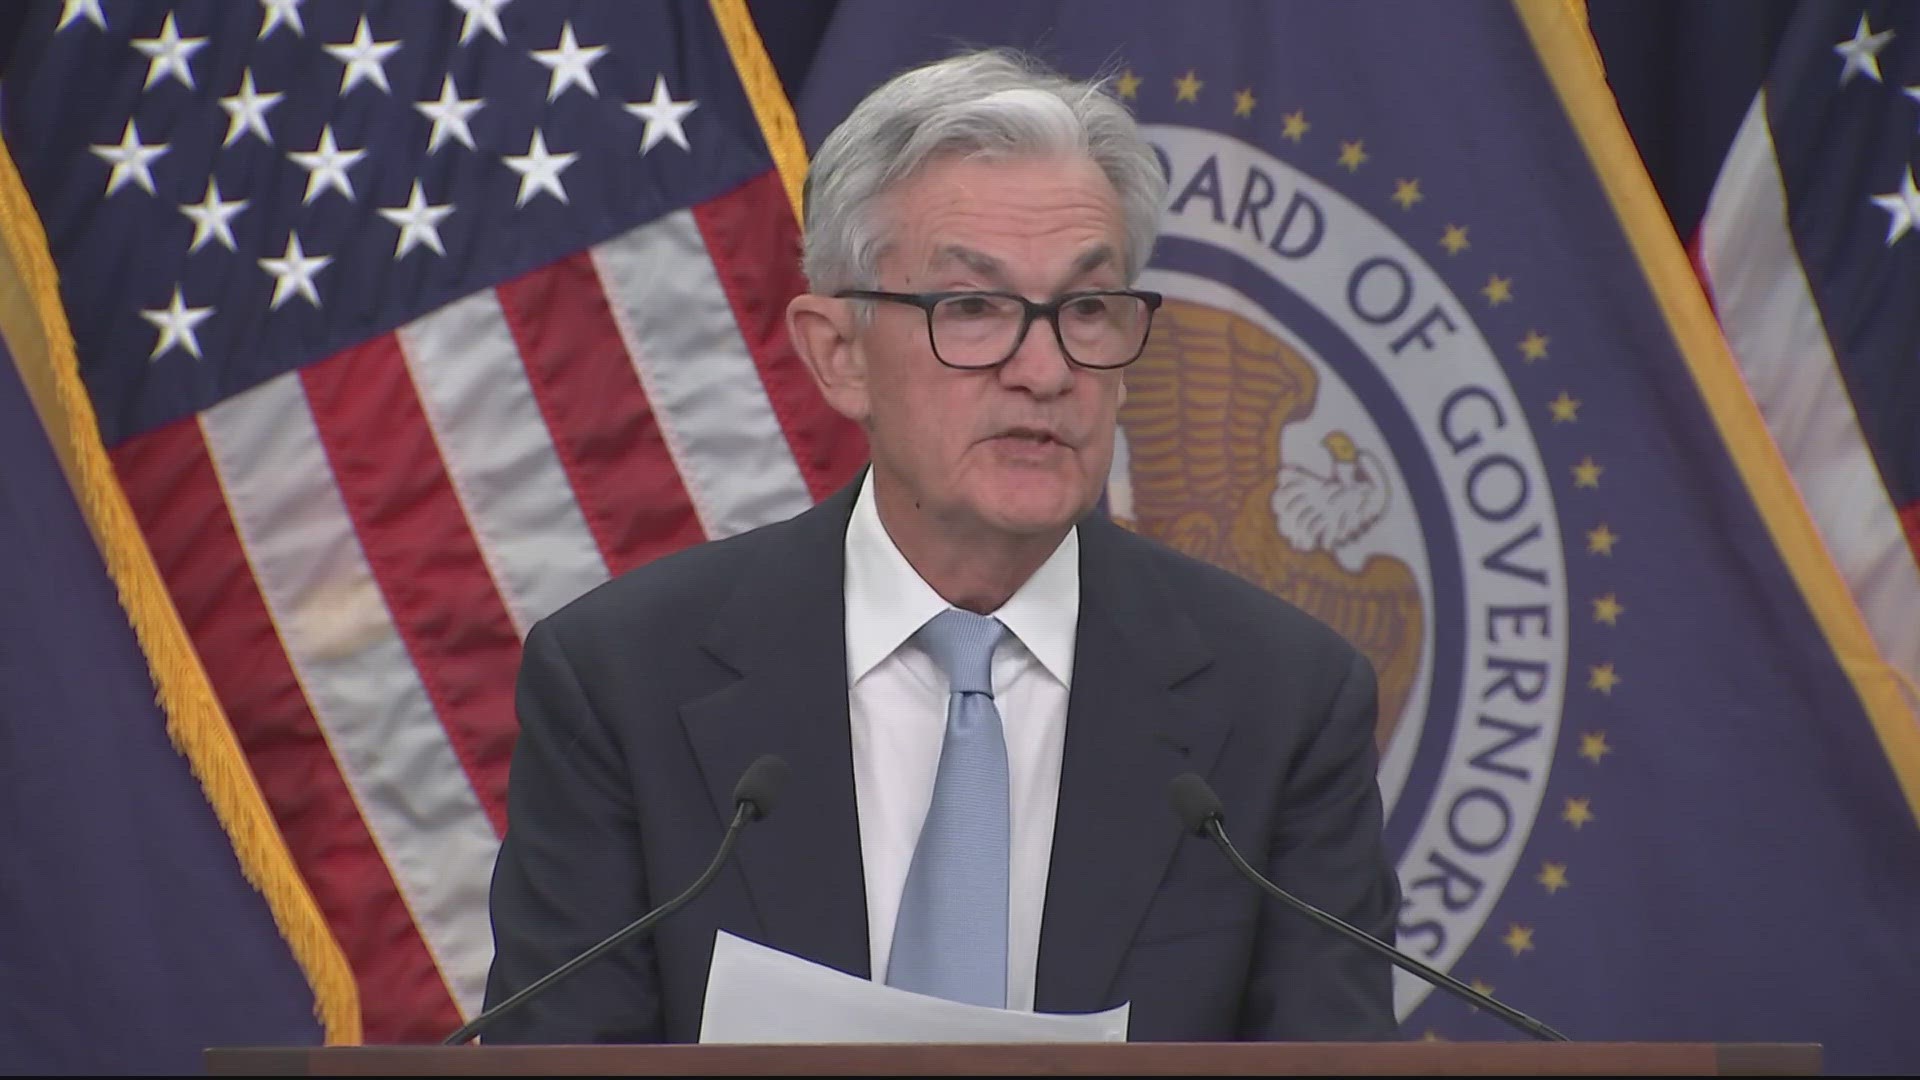 The Federal Reserve raises the interest rate a quarter-point, despite concerns that higher rates could worsen the turmoil that has gripped the banking system.